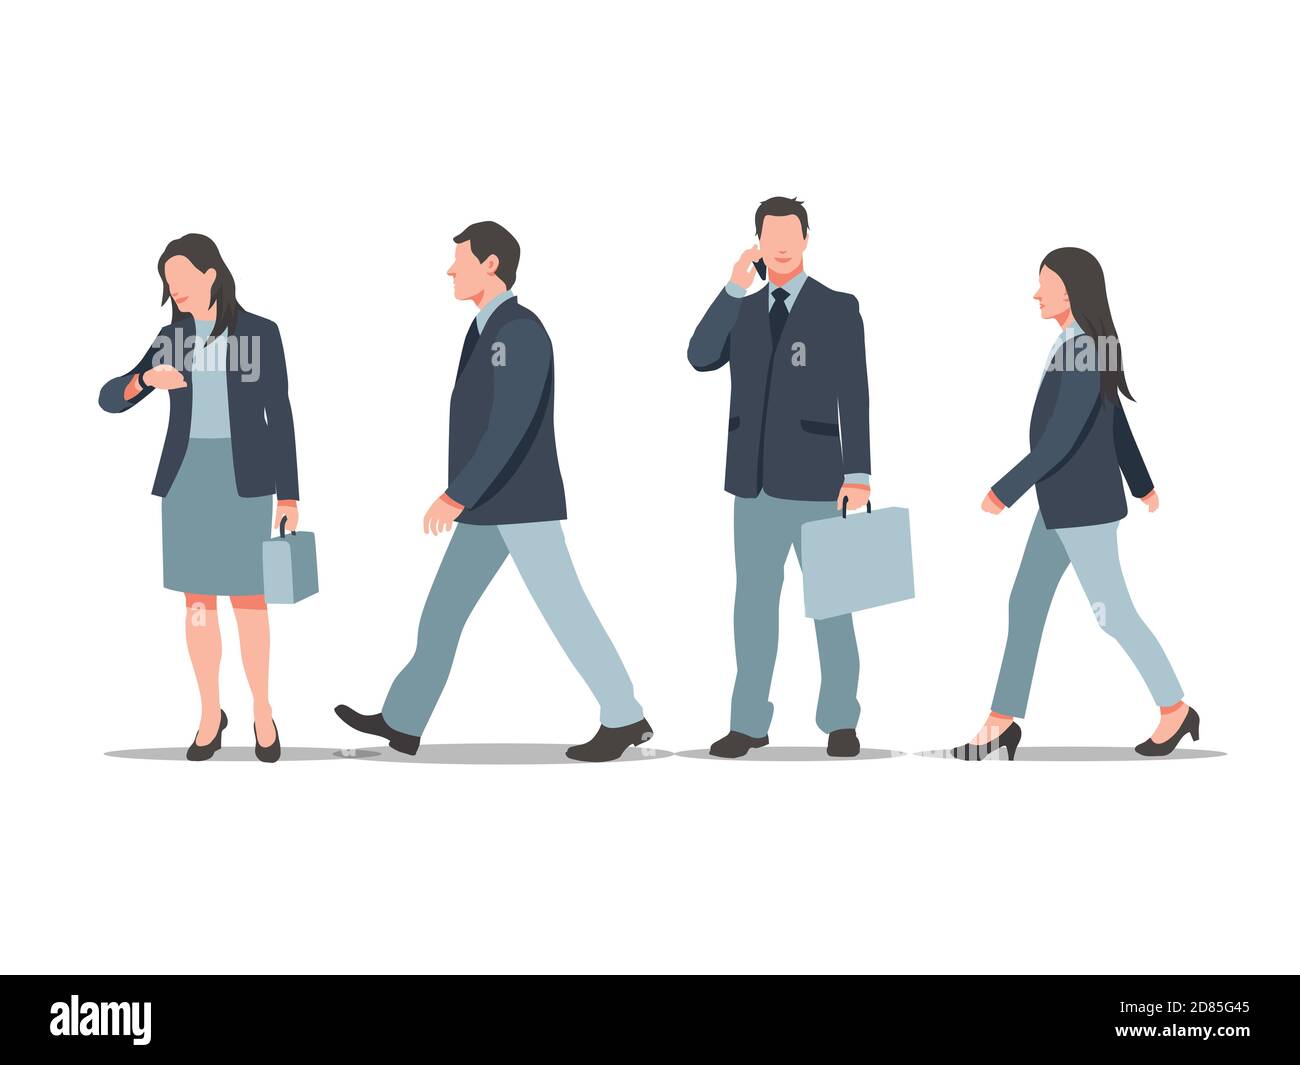 Vector set of walking and standing business characters. International business team. Simple flat design. Stock Vector